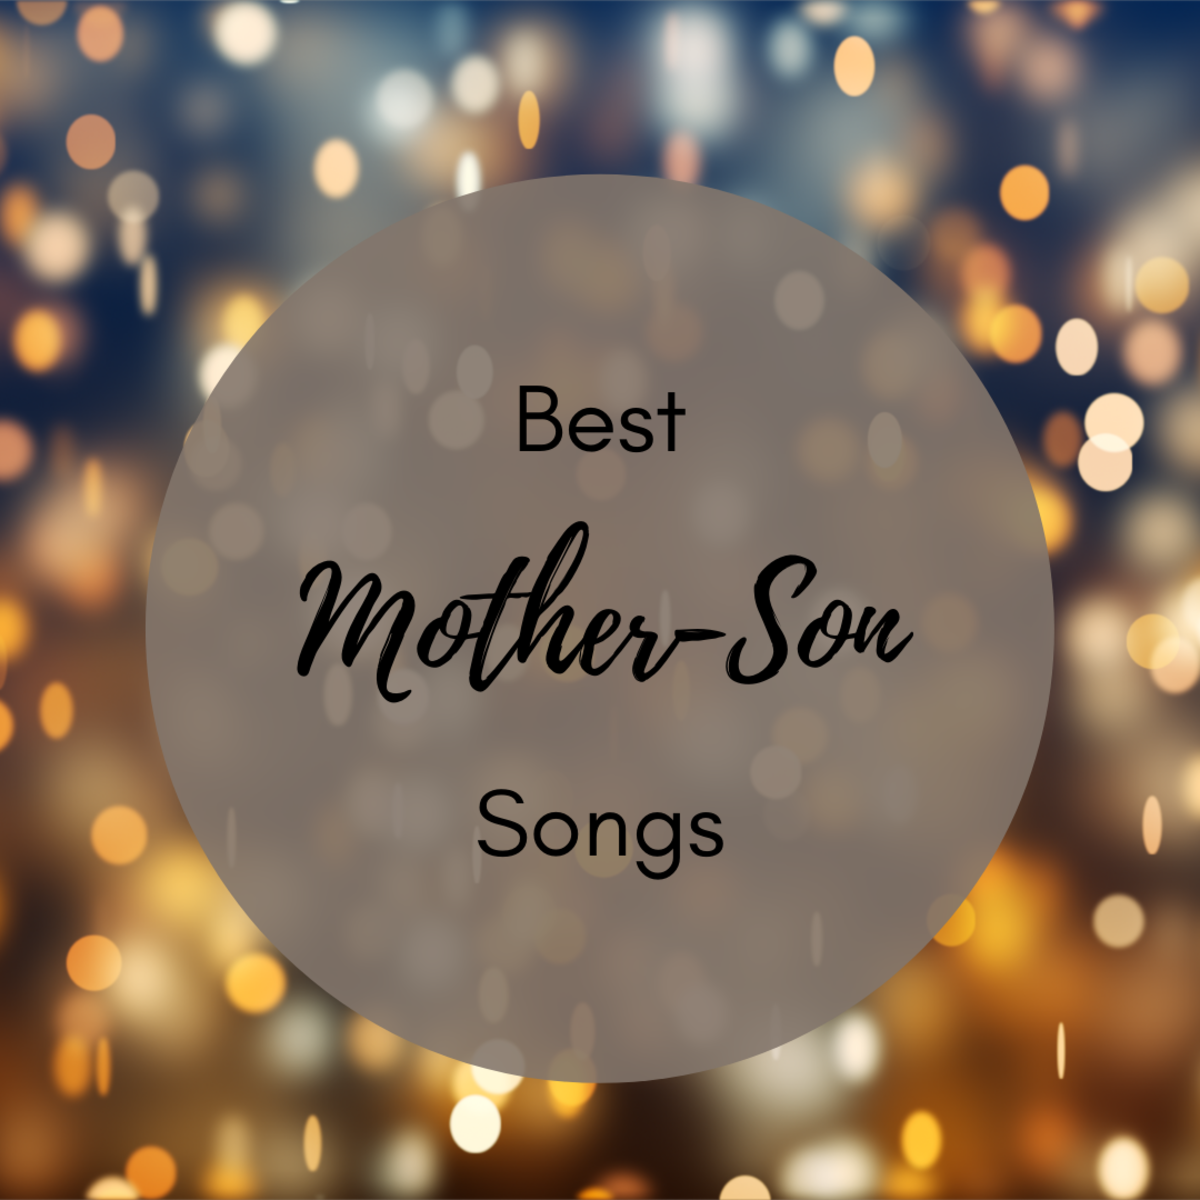 14 Best Mother-Son Songs for Weddings and Other Celebrations